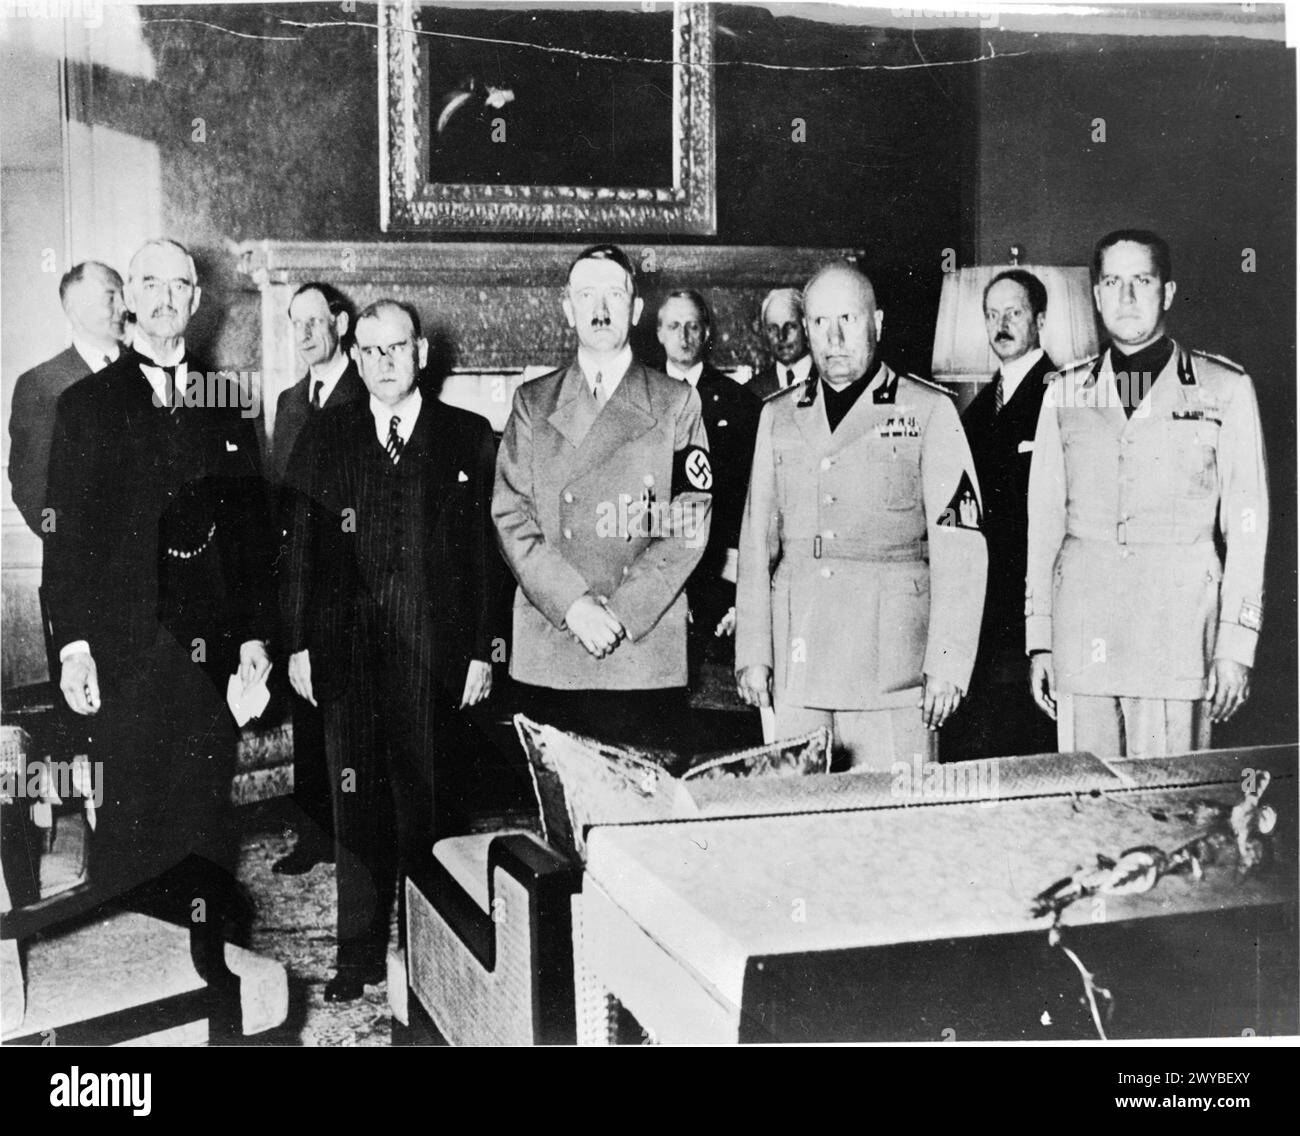 THE MUNICH AGREEMENT, SEPTEMBER 1938 - Hitler with other signatories to the Munich Agreement, 29 September 1938.From left to right: the British Prime Minister, Neville Chamberlain, the French Prime Minister, Edouard Daladier, Adolf Hitler, the Italian leader Benito Mussolini and the Italian Foreign Minister Count Galeazzo Ciano. , Hitler, Adolf, Mussolini, Benito Amilcare Andrea, Chamberlain, Neville, Daladier, Edouard, Ciano, Galeazzo Stock Photo